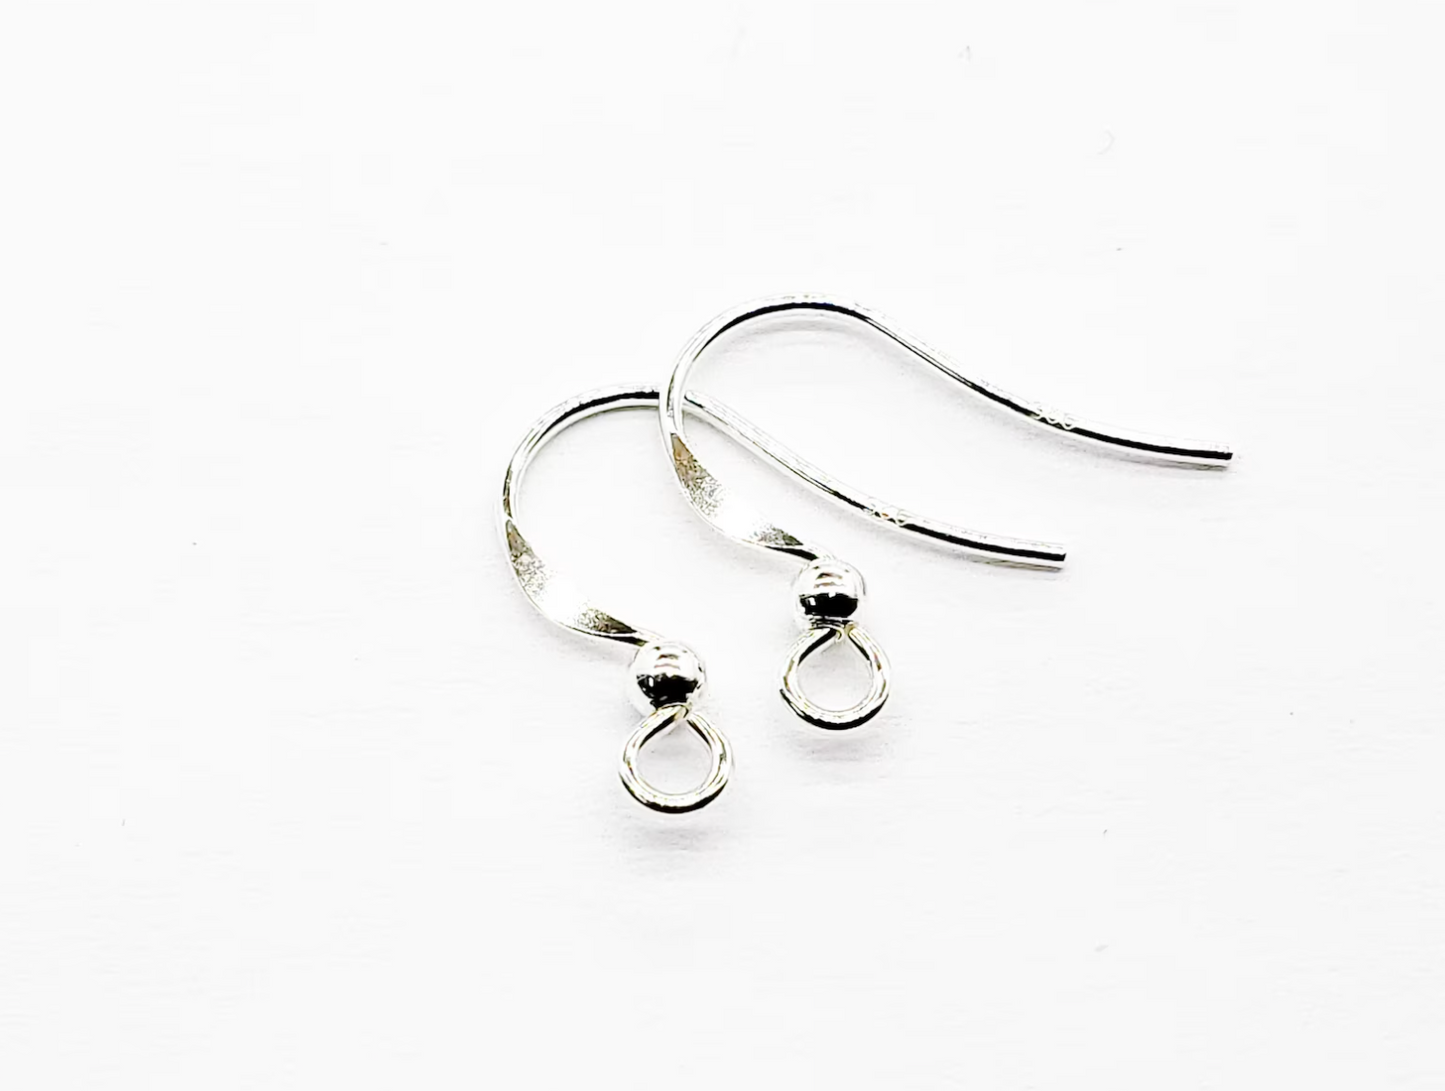 Switch To Sterling Silver Earring Hooks - Only The Hooks, Not Hardware!